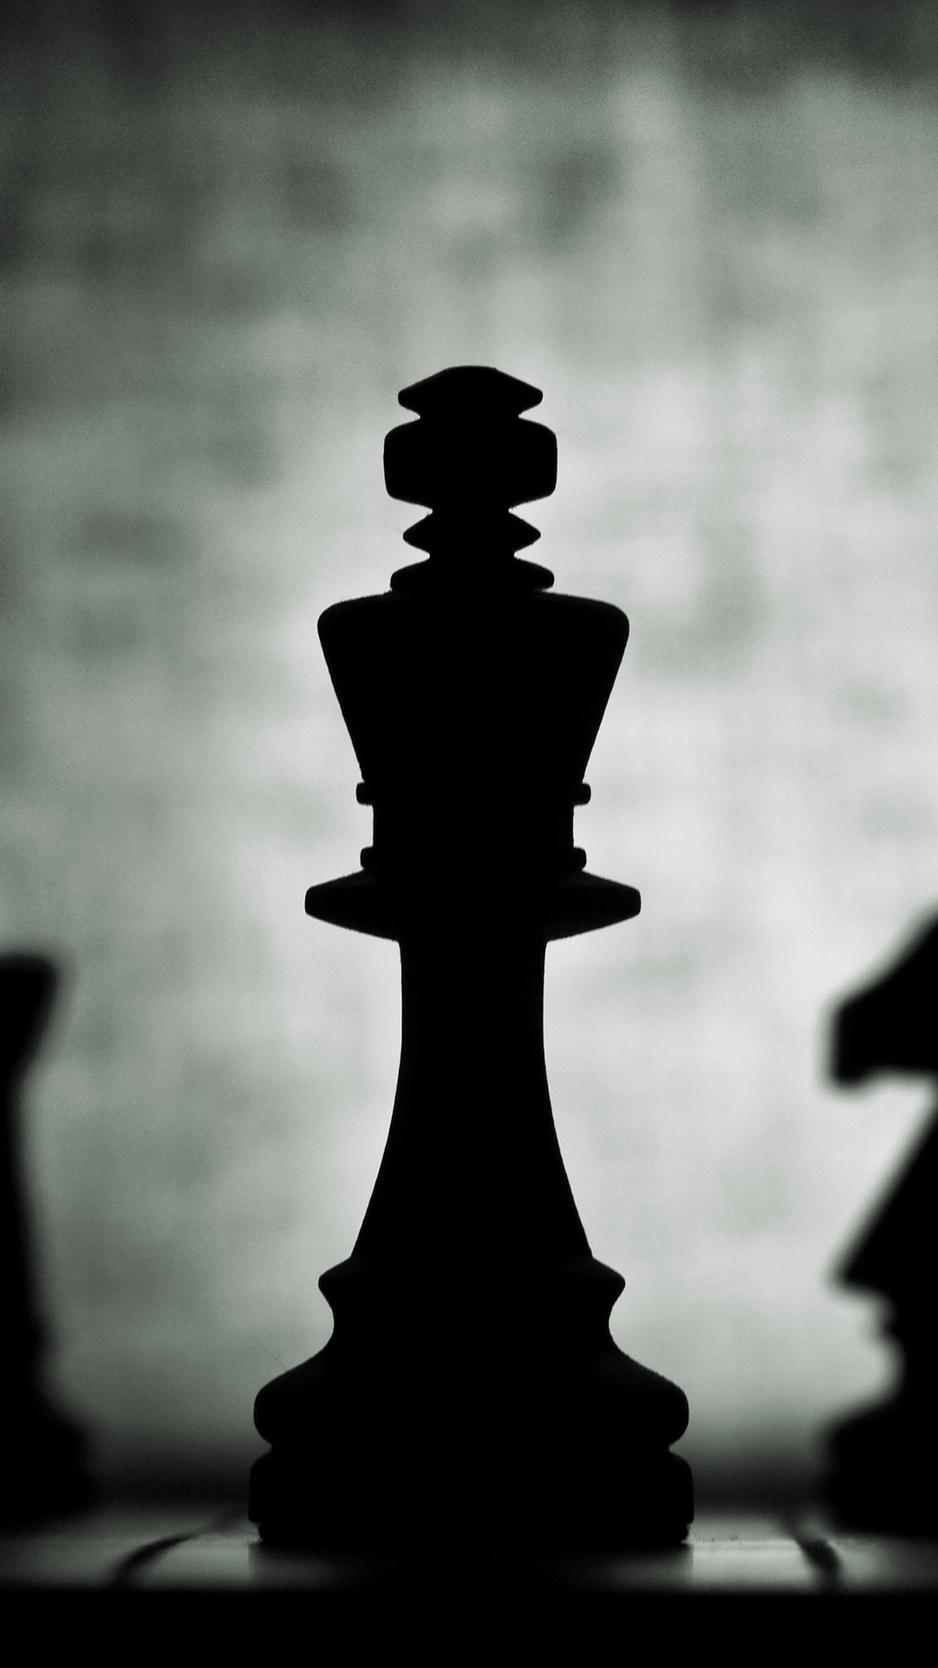 Chess full hd, hdtv, fhd, 1080p wallpapers hd, desktop backgrounds 1920x1080,  images and pictures